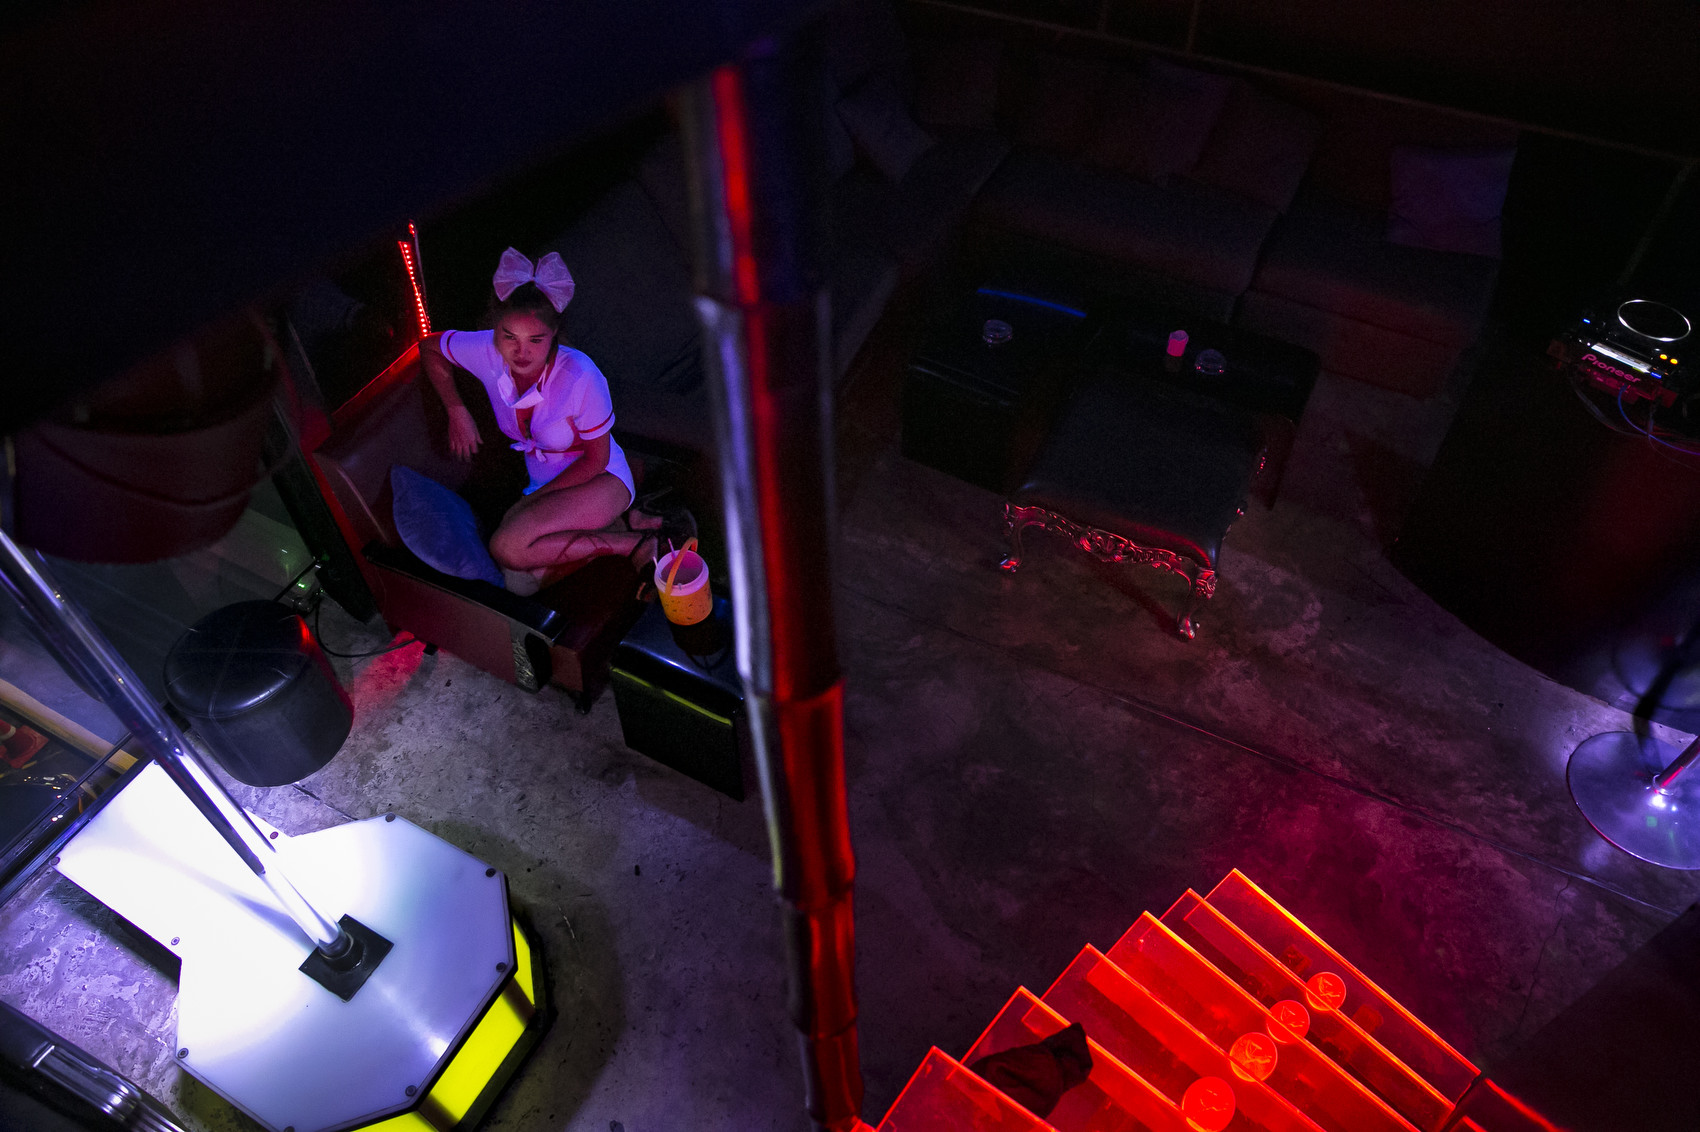 A girl waits for customers at a bar in the Patpong red light district in Bangkok, Thailand With entry into Thailand still restricted, and relatively few tourists able to enter, a good living has turned into a bad one for the country's sex workers.